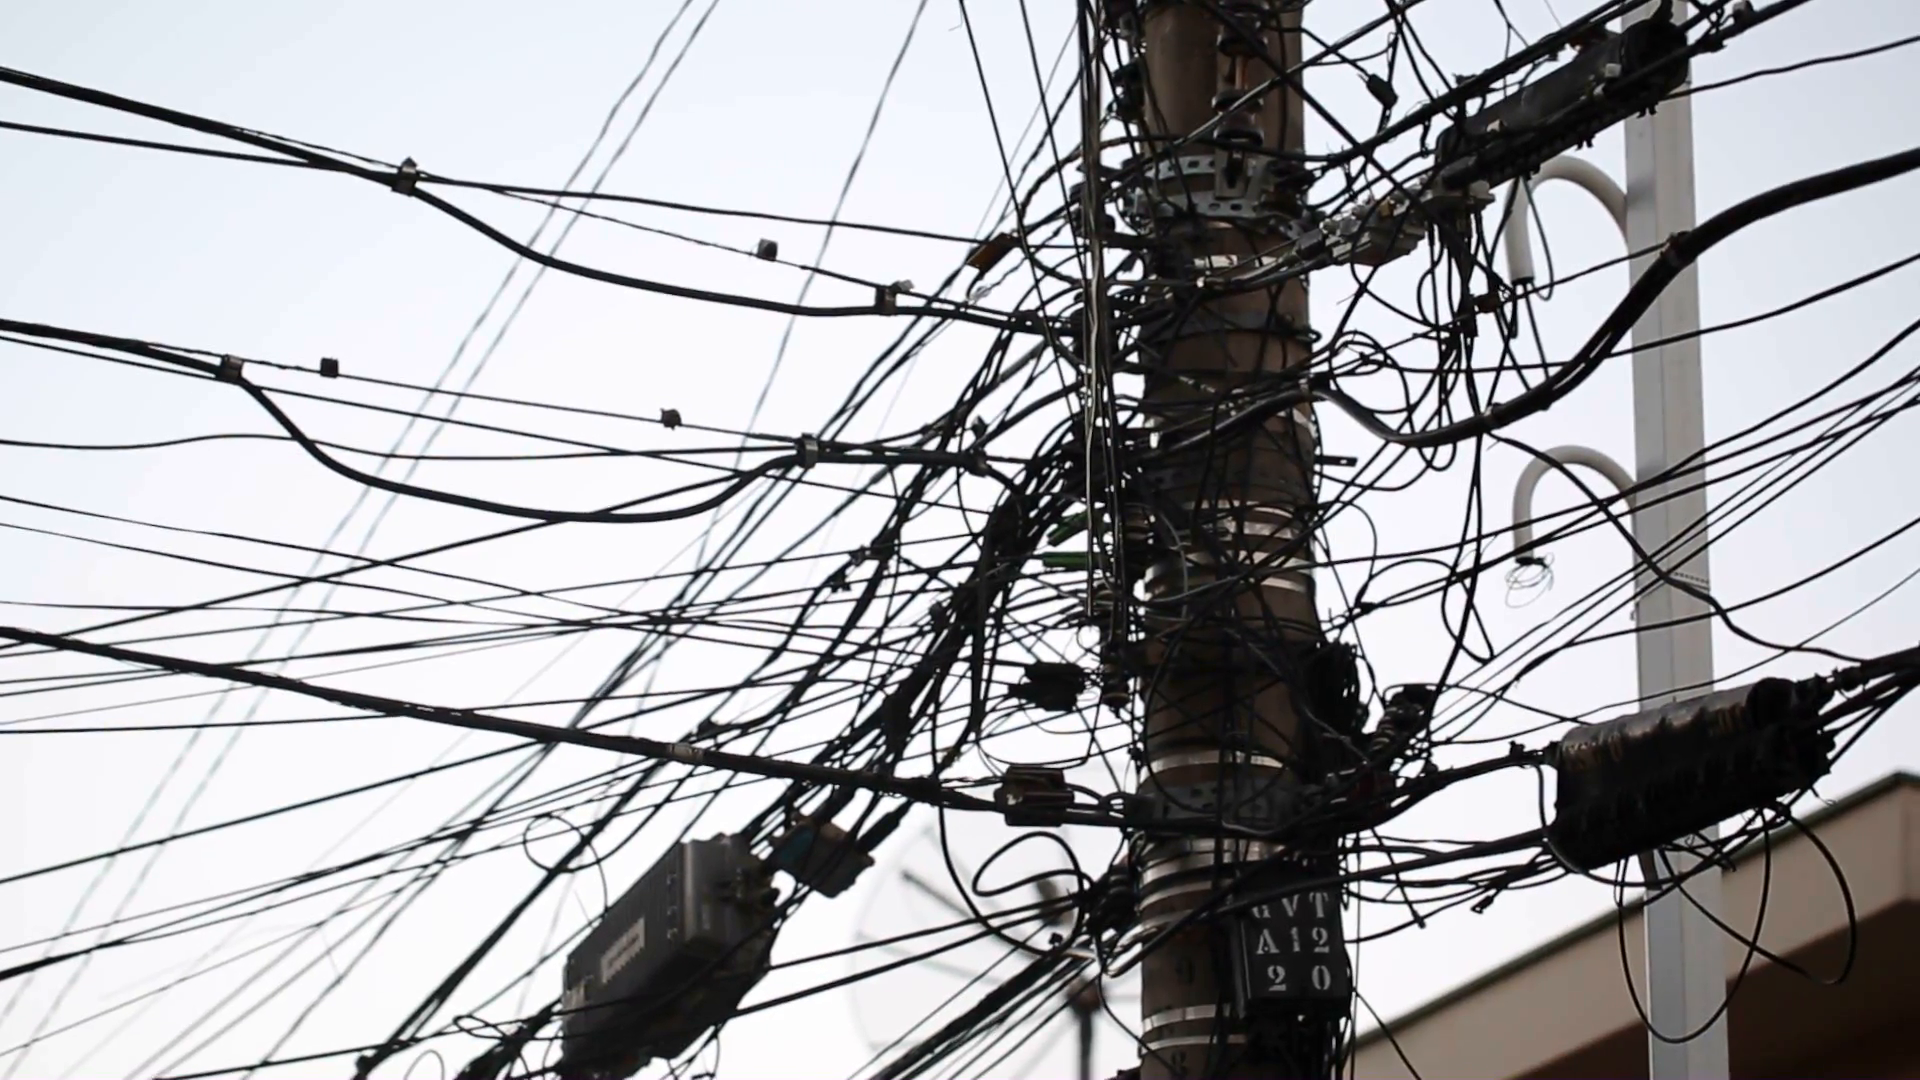 Electrical wires. Visual pollution from metropolitan third world ...